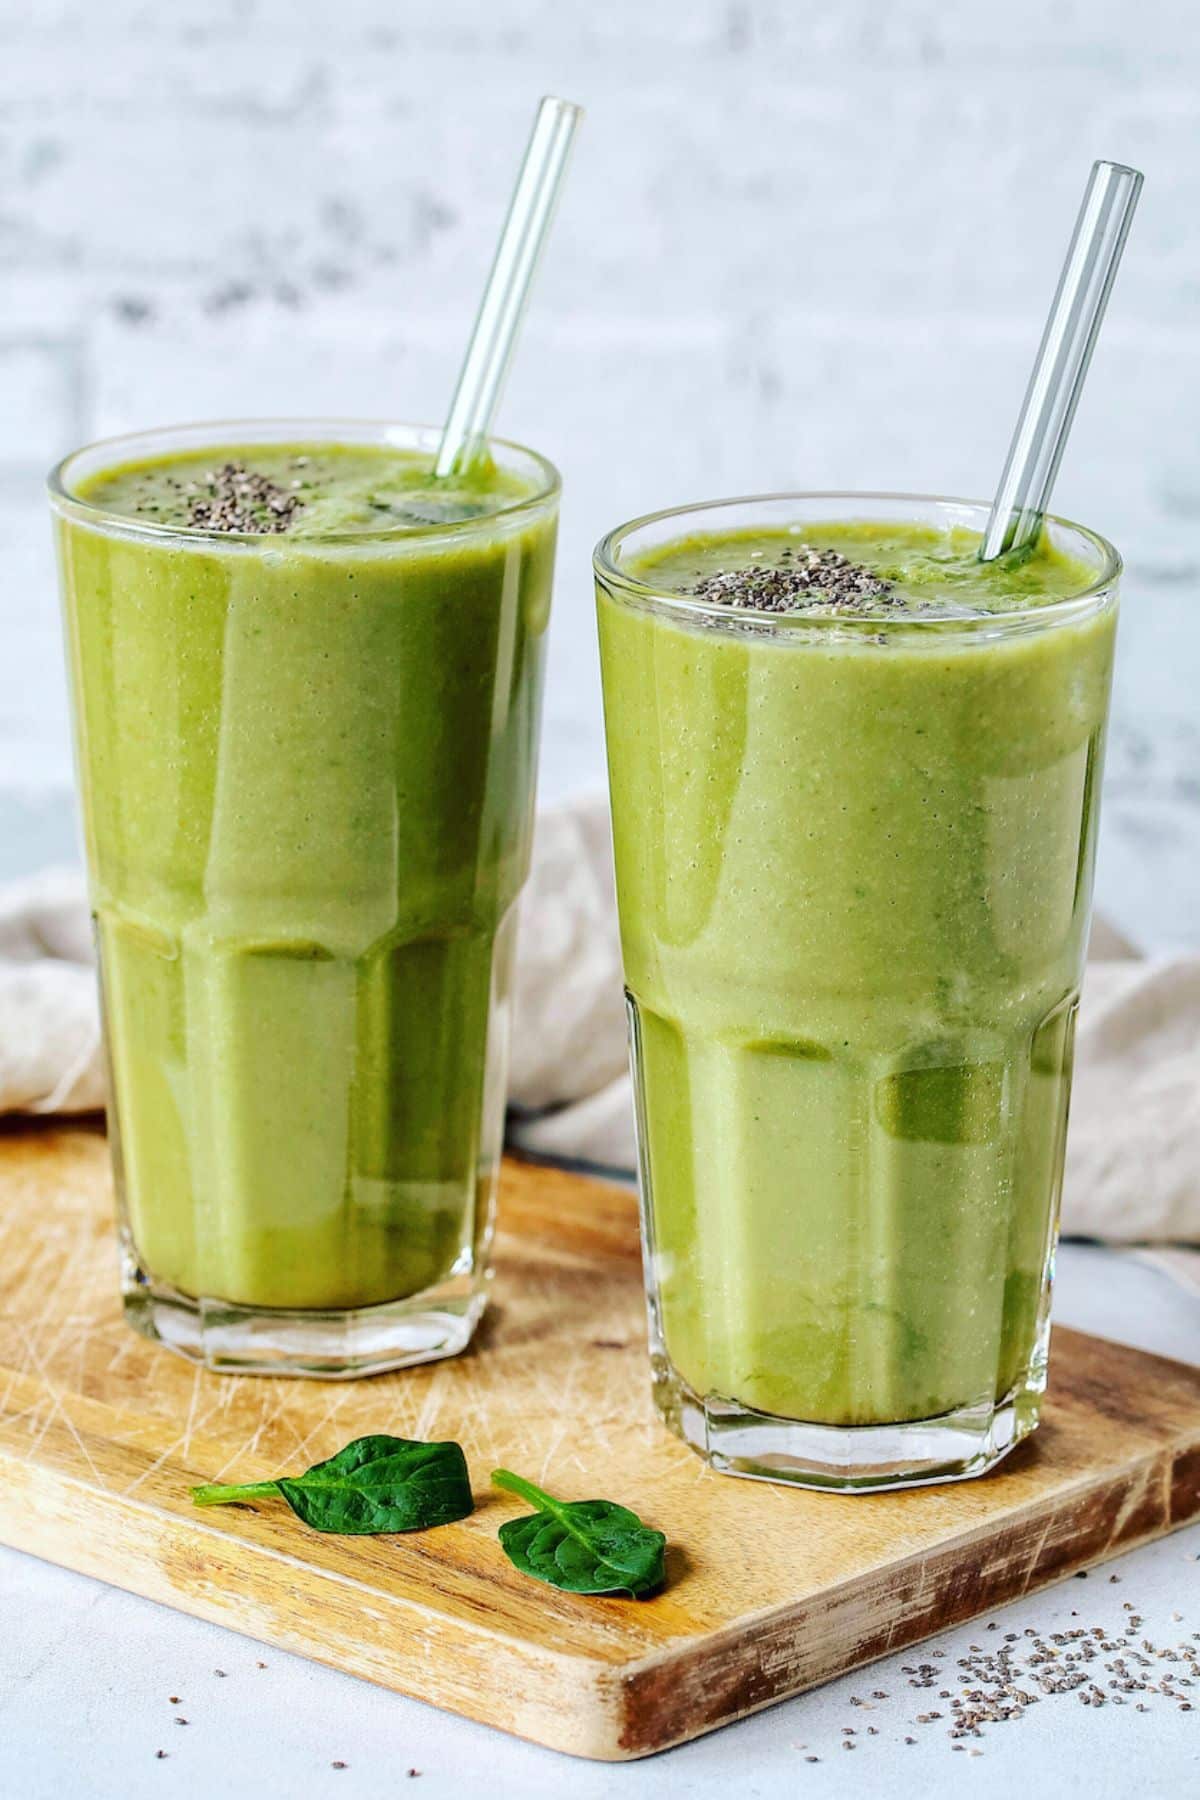 what green vegetables are good for smoothies